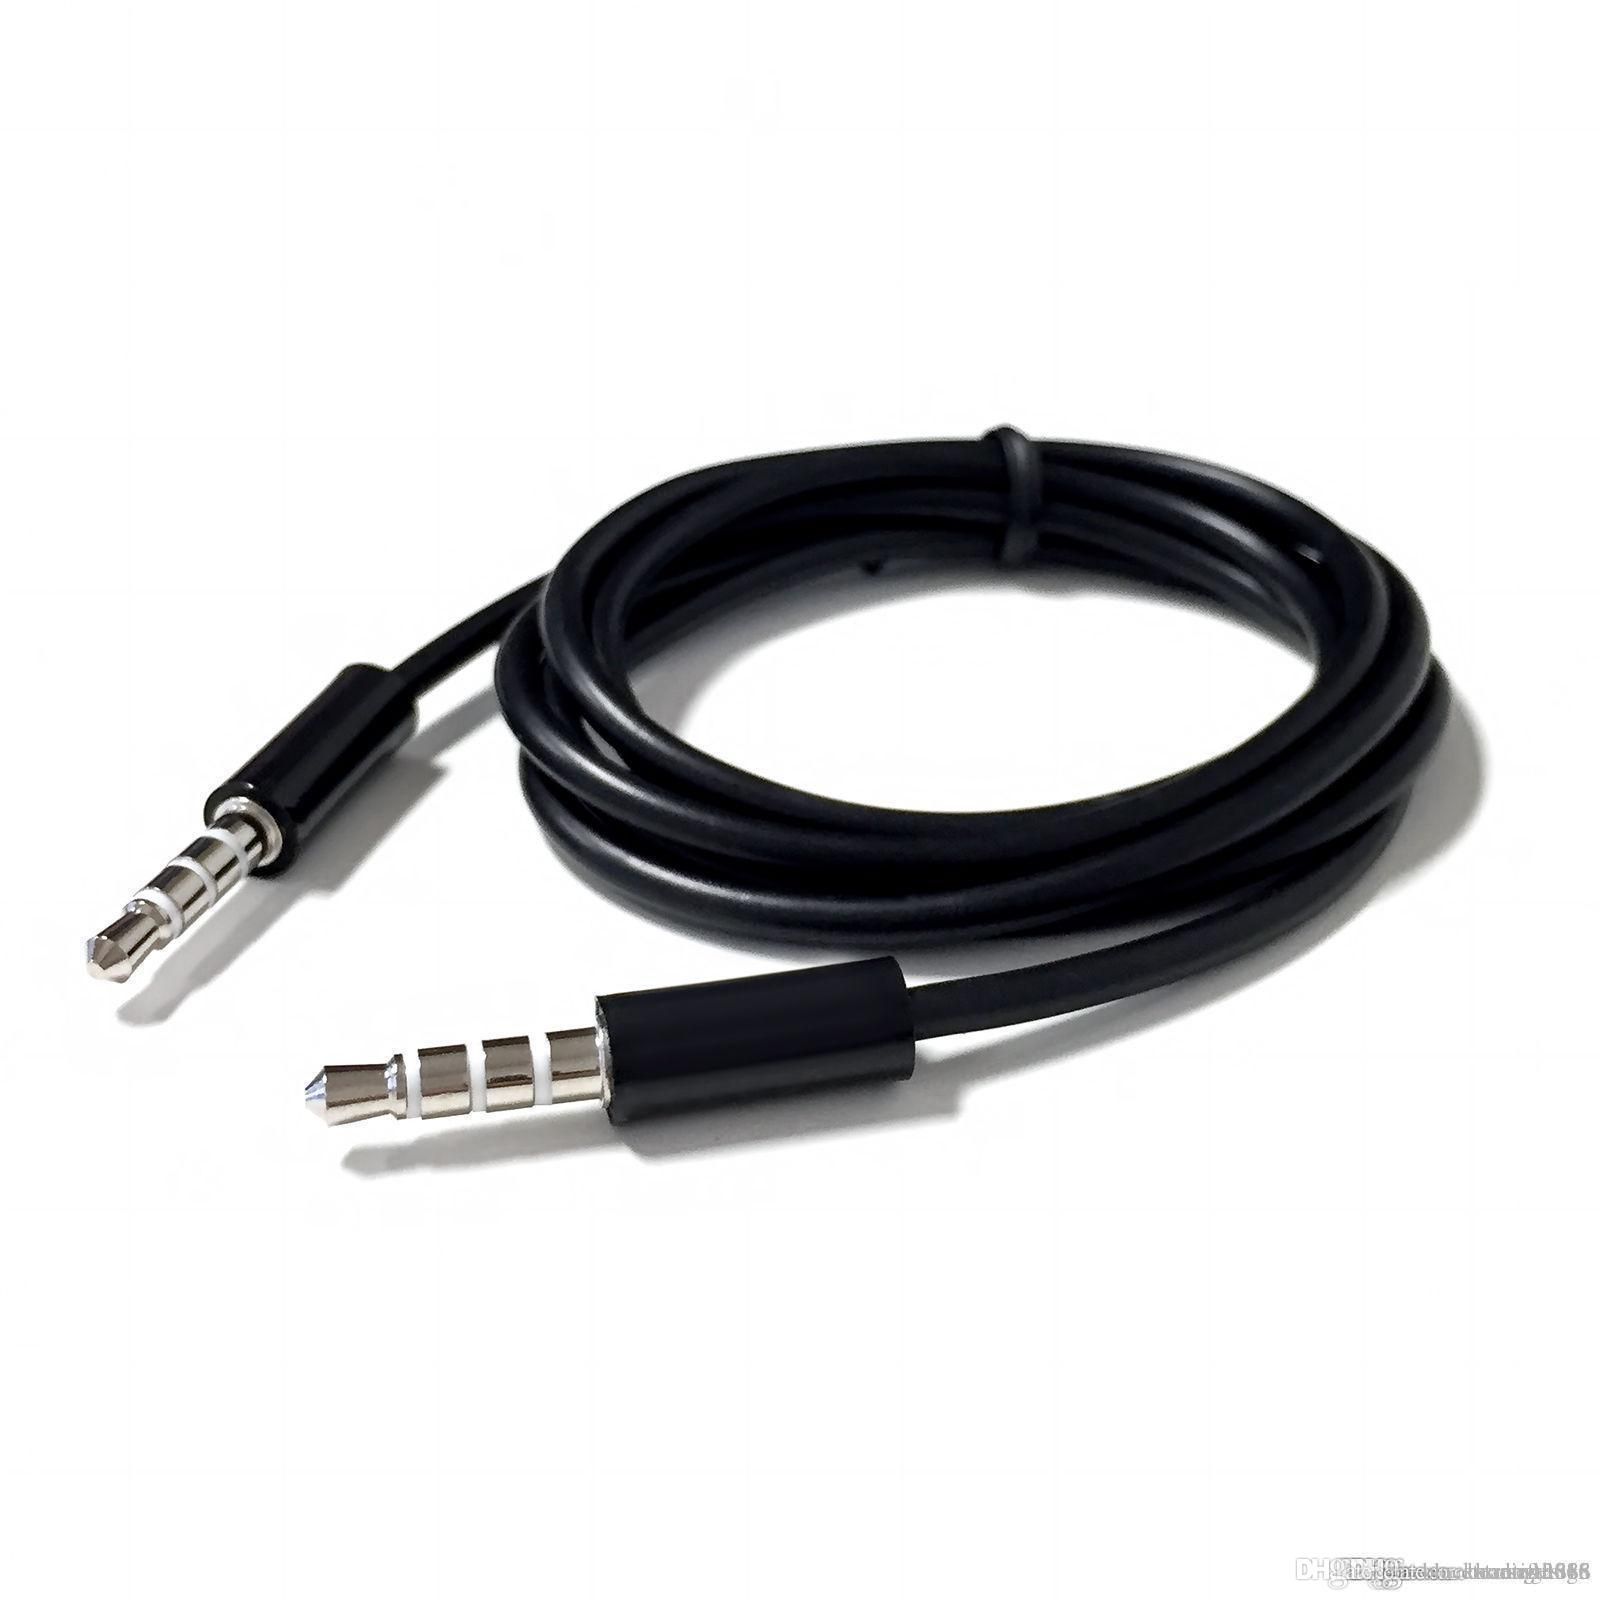 Black 3.5mm Male to Male Stereo Audio AUX Cable Cord for PC iPod CAR UK Lot